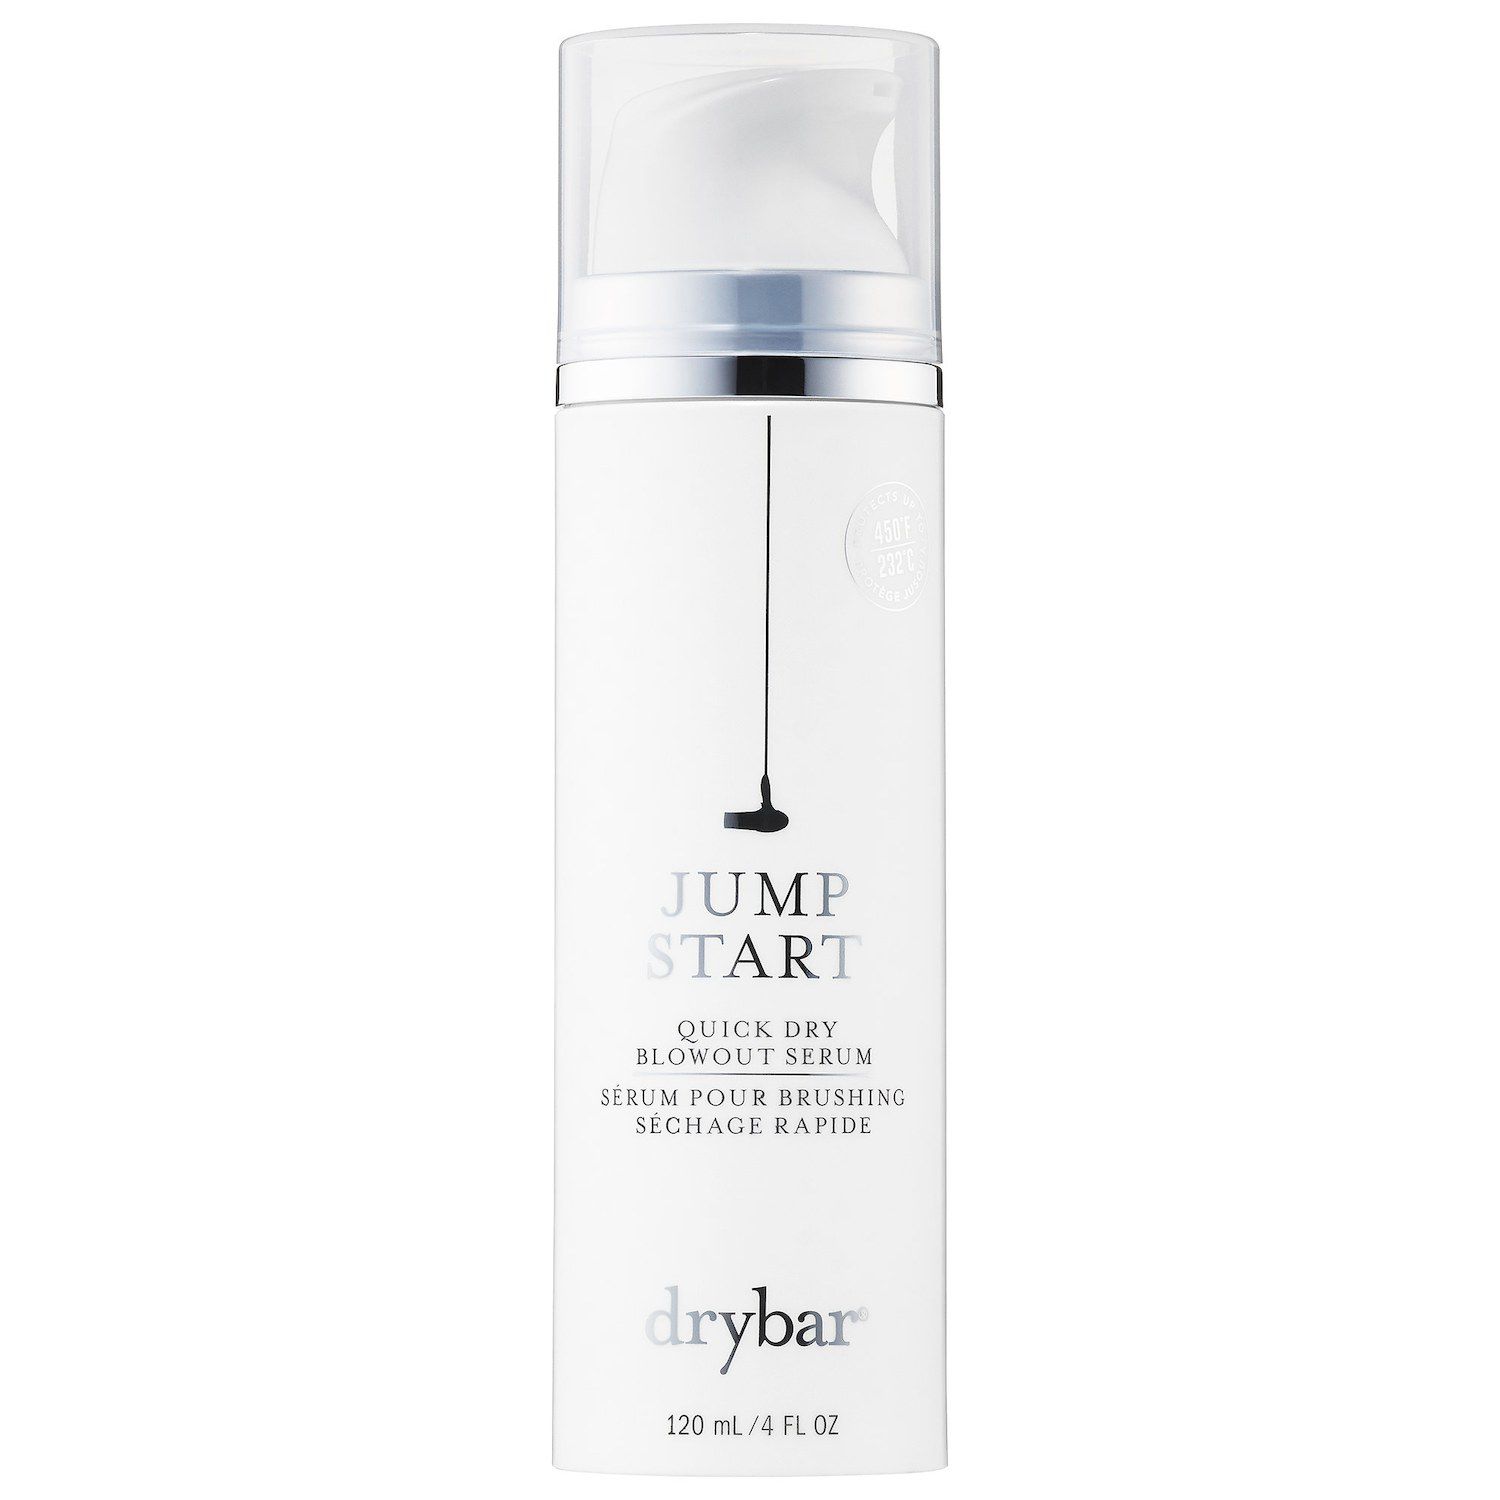 Image for Drybar Jump Start Quick Dry Blowout Serum at Kohl's.